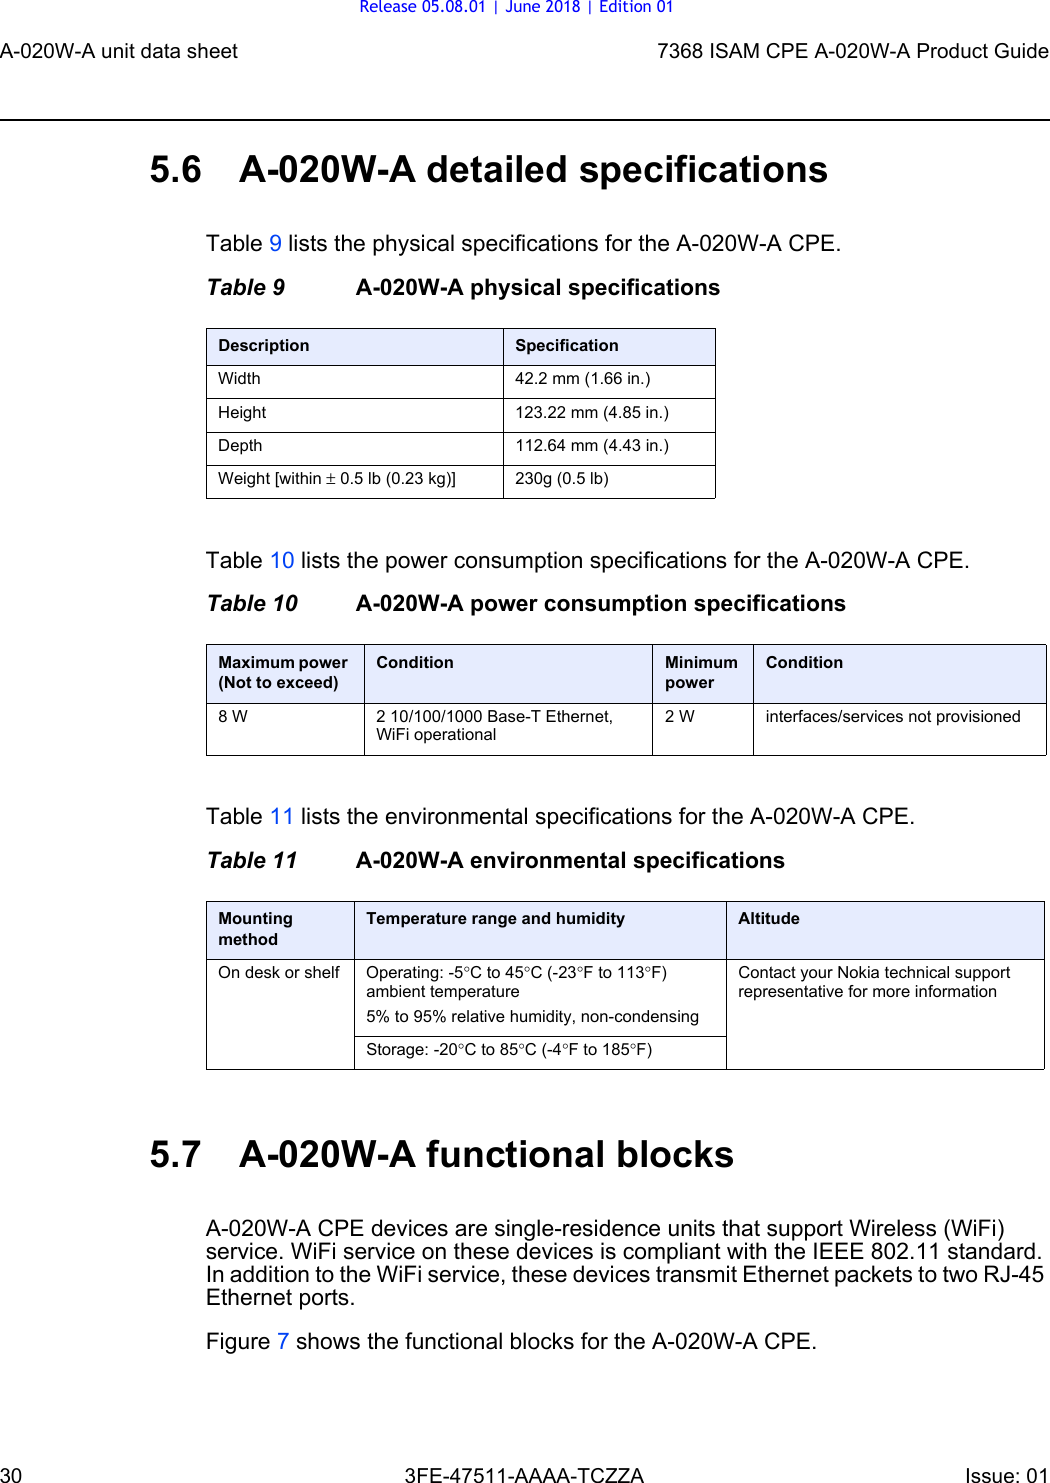 A-020W-A unit data sheet307368 ISAM CPE A-020W-A Product Guide3FE-47511-AAAA-TCZZA Issue: 01 5.6 A-020W-A detailed specificationsTable 9 lists the physical specifications for the A-020W-A CPE.Table 9 A-020W-A physical specificationsTable 10 lists the power consumption specifications for the A-020W-A CPE.Table 10 A-020W-A power consumption specificationsTable 11 lists the environmental specifications for the A-020W-A CPE.Table 11 A-020W-A environmental specifications5.7 A-020W-A functional blocksA-020W-A CPE devices are single-residence units that support Wireless (WiFi) service. WiFi service on these devices is compliant with the IEEE 802.11 standard. In addition to the WiFi service, these devices transmit Ethernet packets to two RJ-45 Ethernet ports.Figure 7 shows the functional blocks for the A-020W-A CPE.Description SpecificationWidth 42.2 mm (1.66 in.)Height 123.22 mm (4.85 in.)Depth 112.64 mm (4.43 in.)Weight [within ± 0.5 lb (0.23 kg)] 230g (0.5 lb)Maximum power (Not to exceed)Condition Minimum powerCondition8 W 2 10/100/1000 Base-T Ethernet, WiFi operational2 W interfaces/services not provisionedMounting methodTemperature range and humidity AltitudeOn desk or shelf Operating: -5°C to 45°C (-23°F to 113°F) ambient temperature5% to 95% relative humidity, non-condensingContact your Nokia technical support representative for more informationStorage: -20°C to 85°C (-4°F to 185°F)Release 05.08.01 | June 2018 | Edition 01